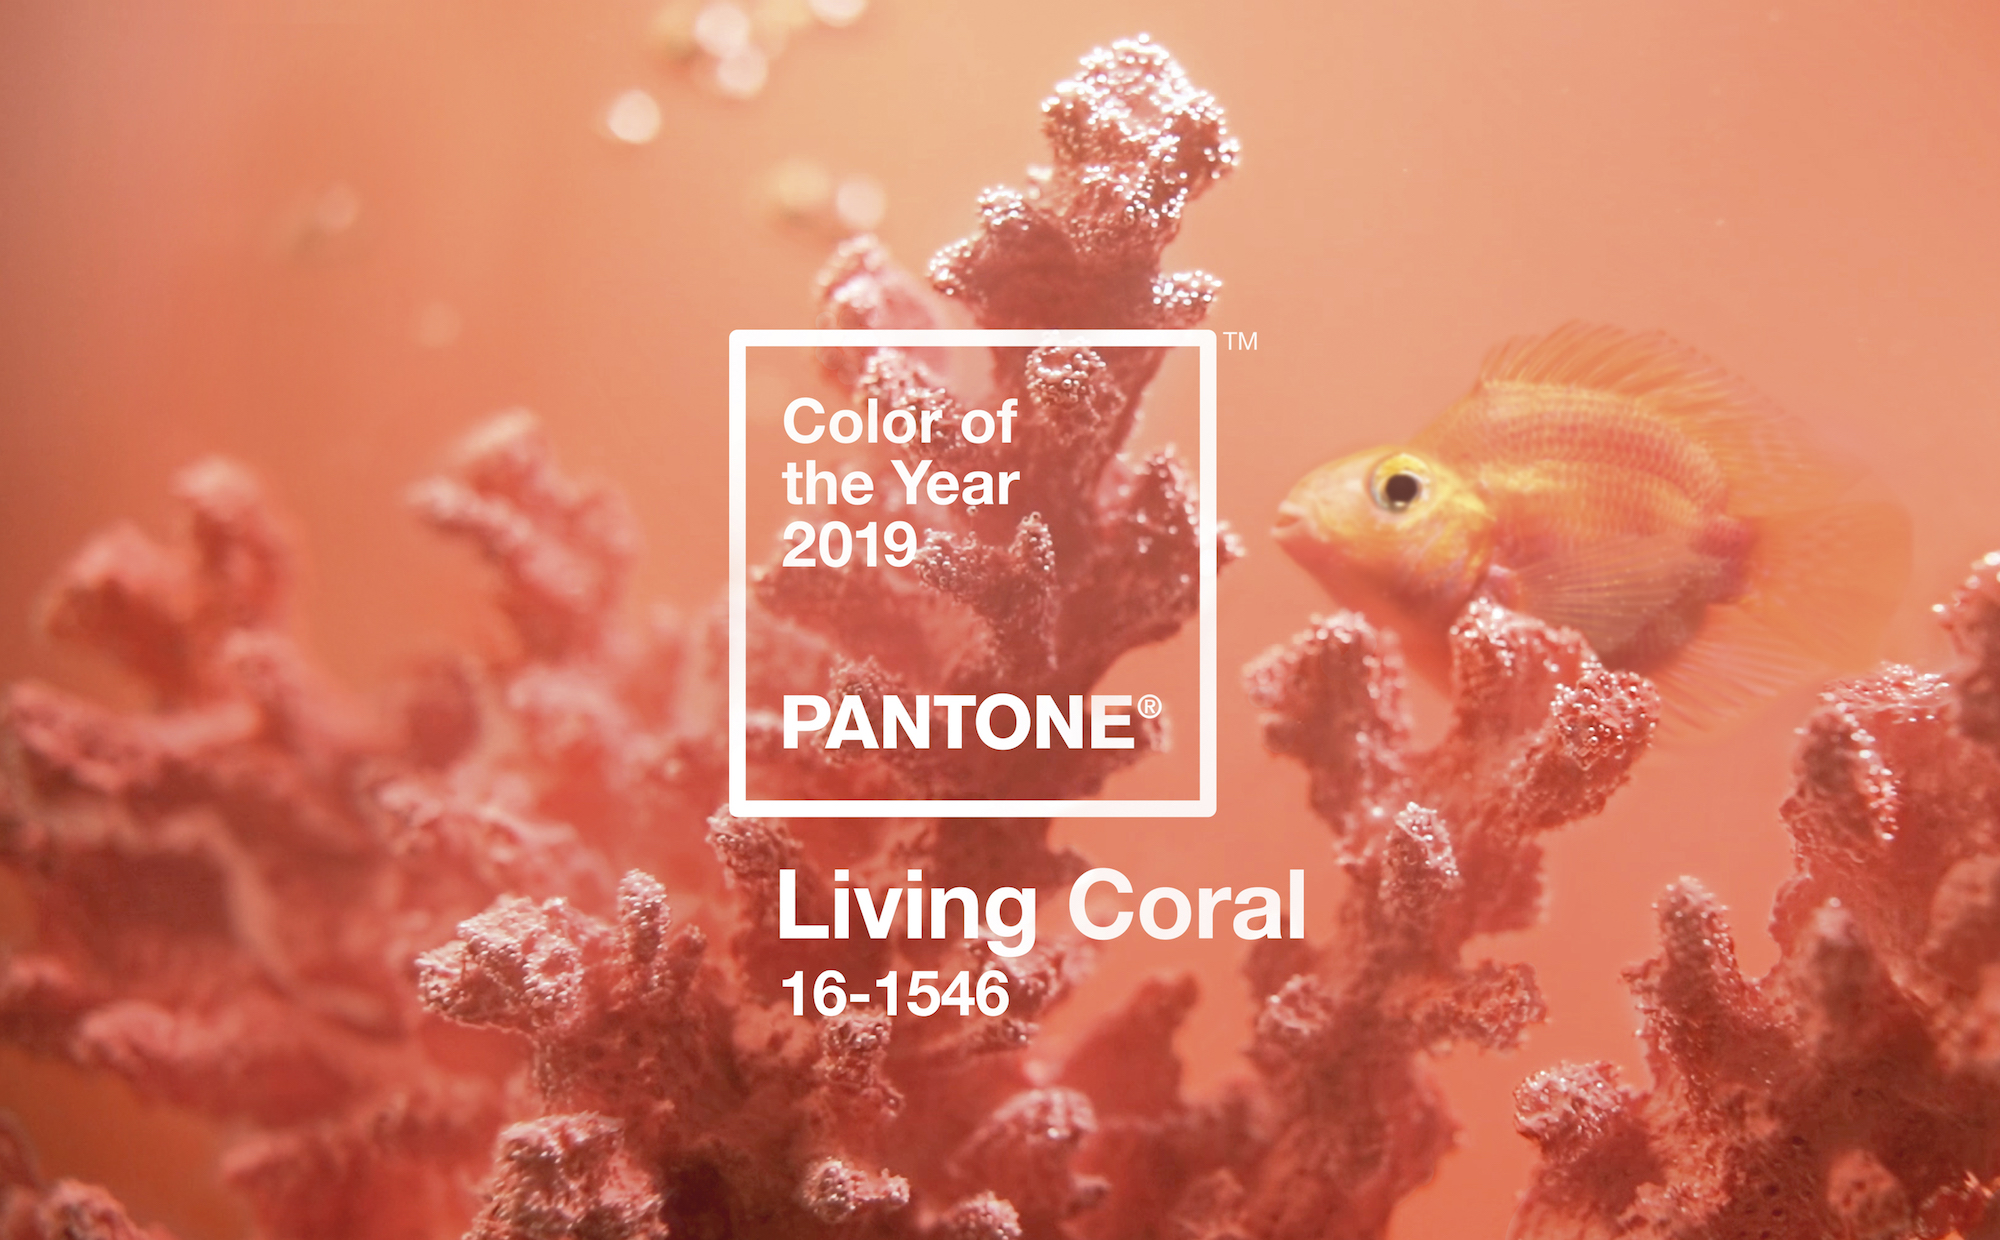 Brand New Pantone’s 2019 Color of the Year